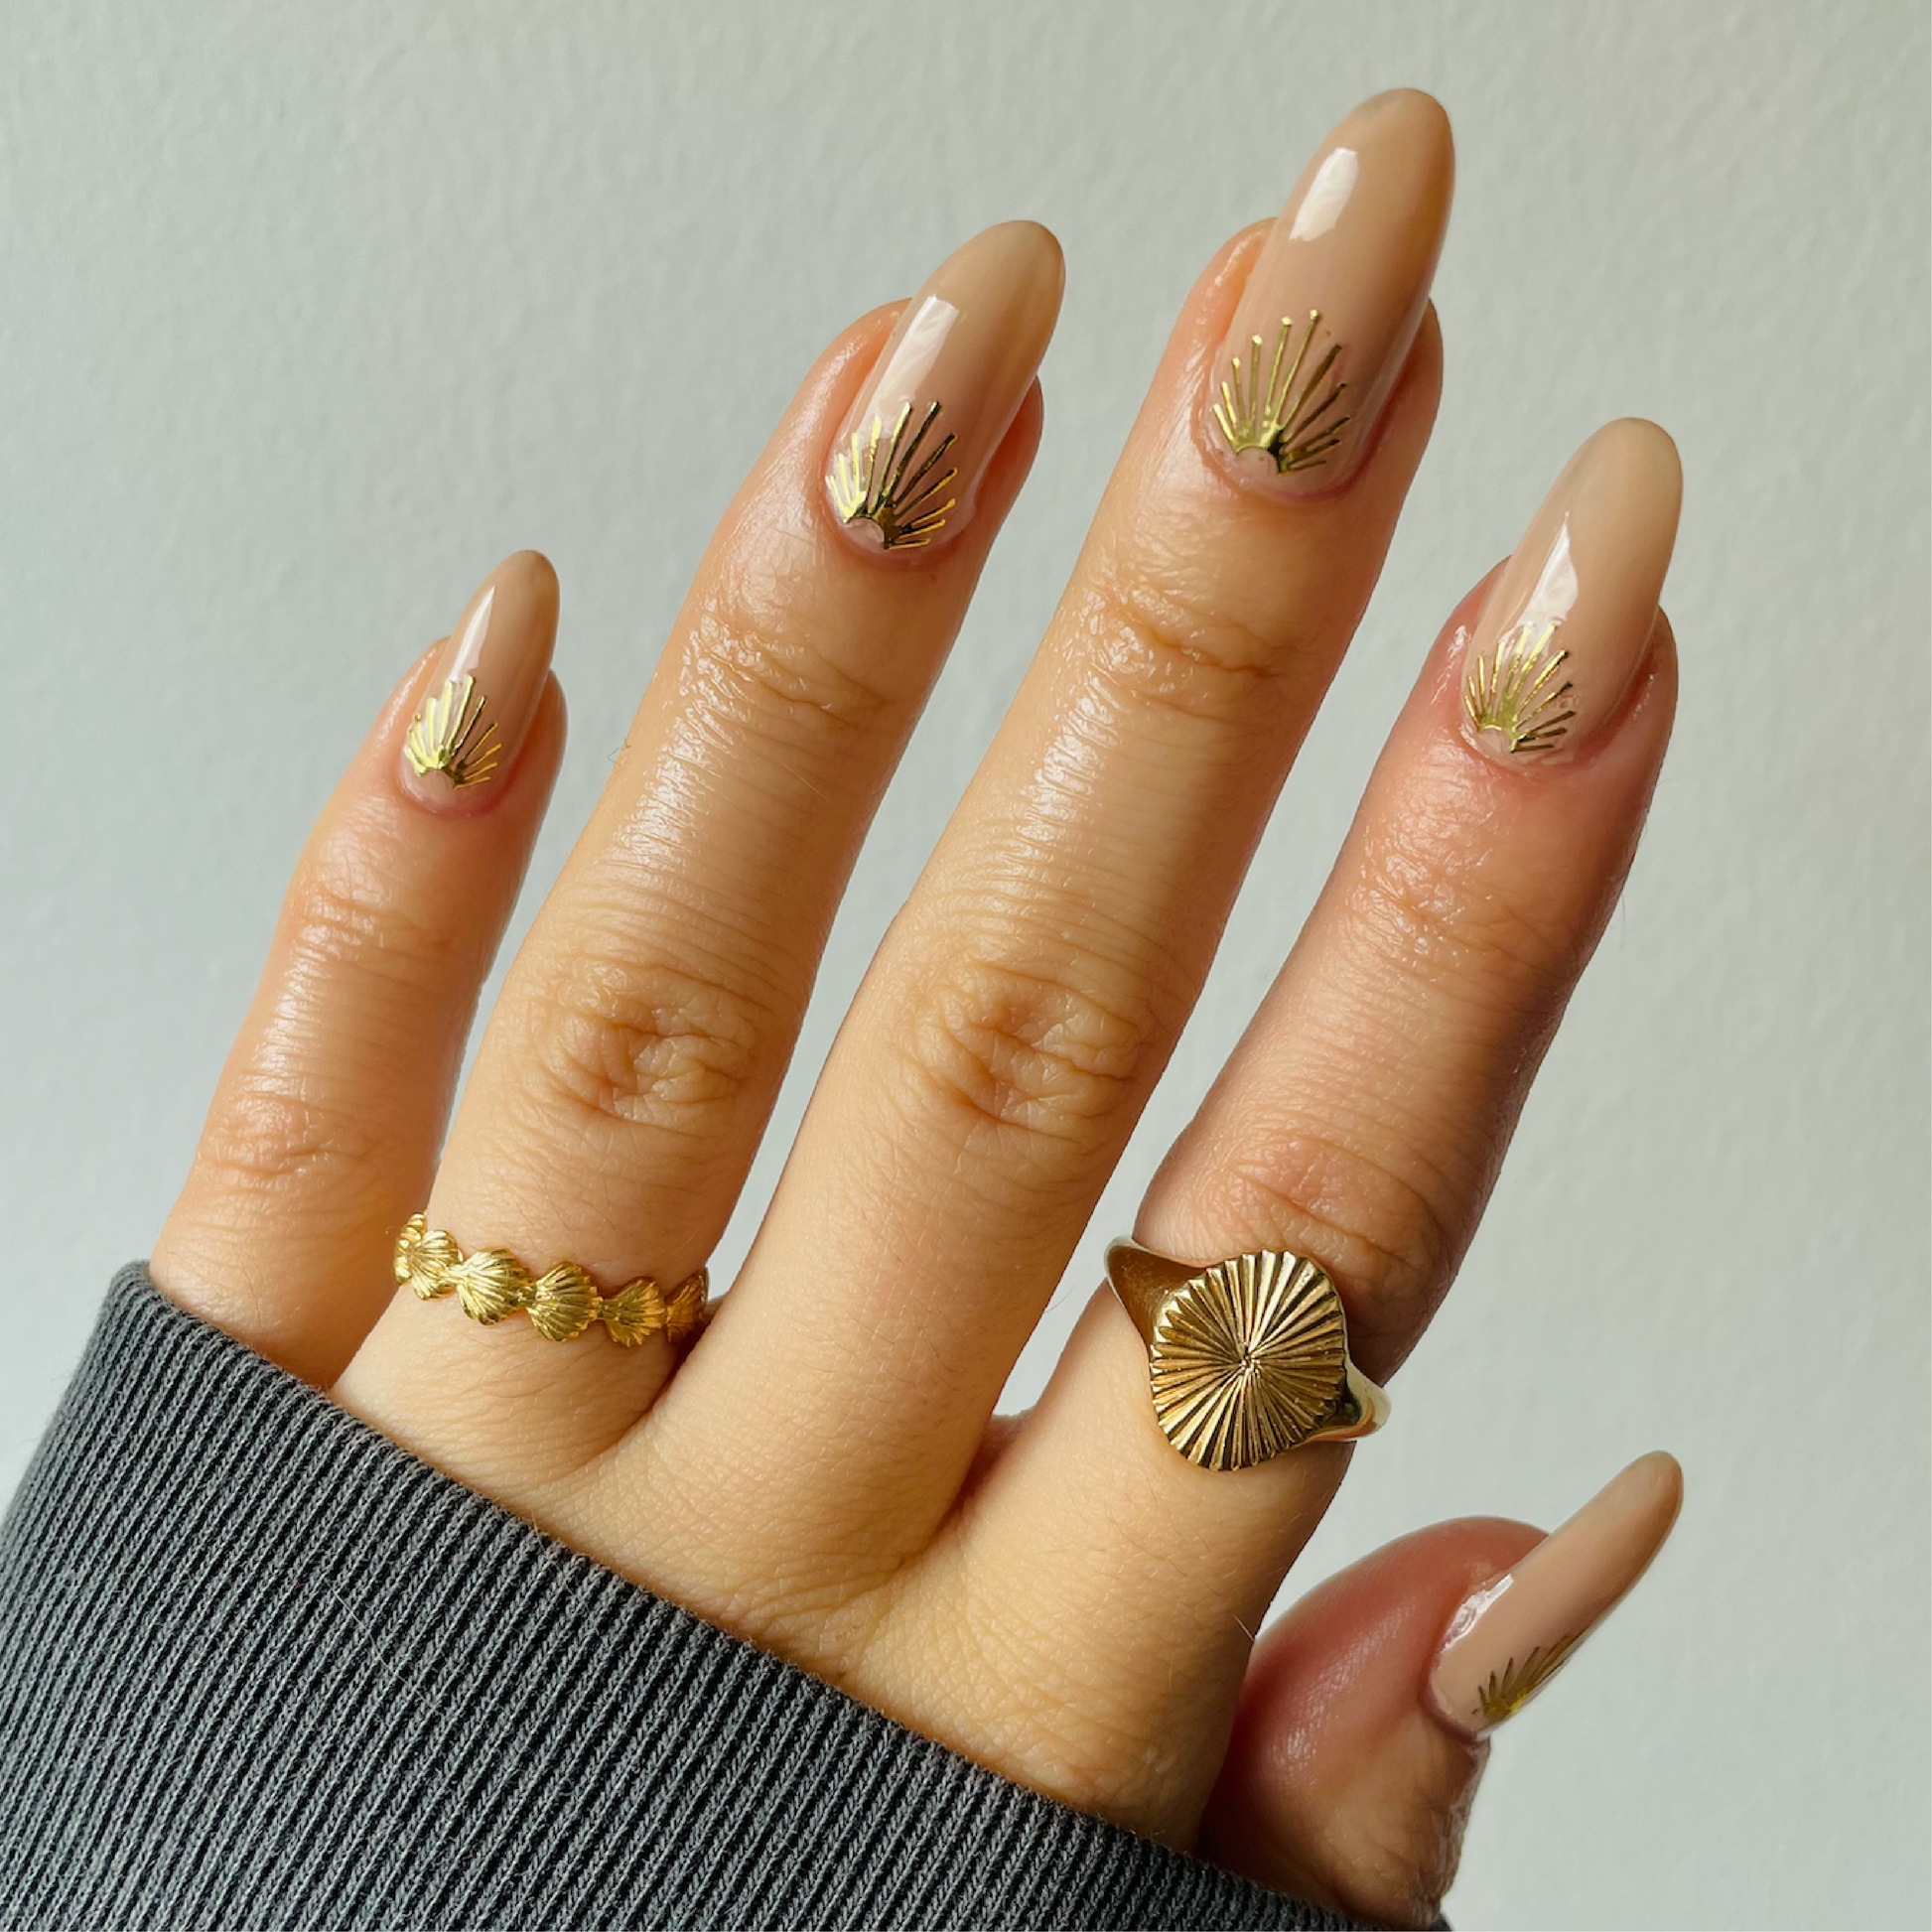 Art Deco nails on nude nails